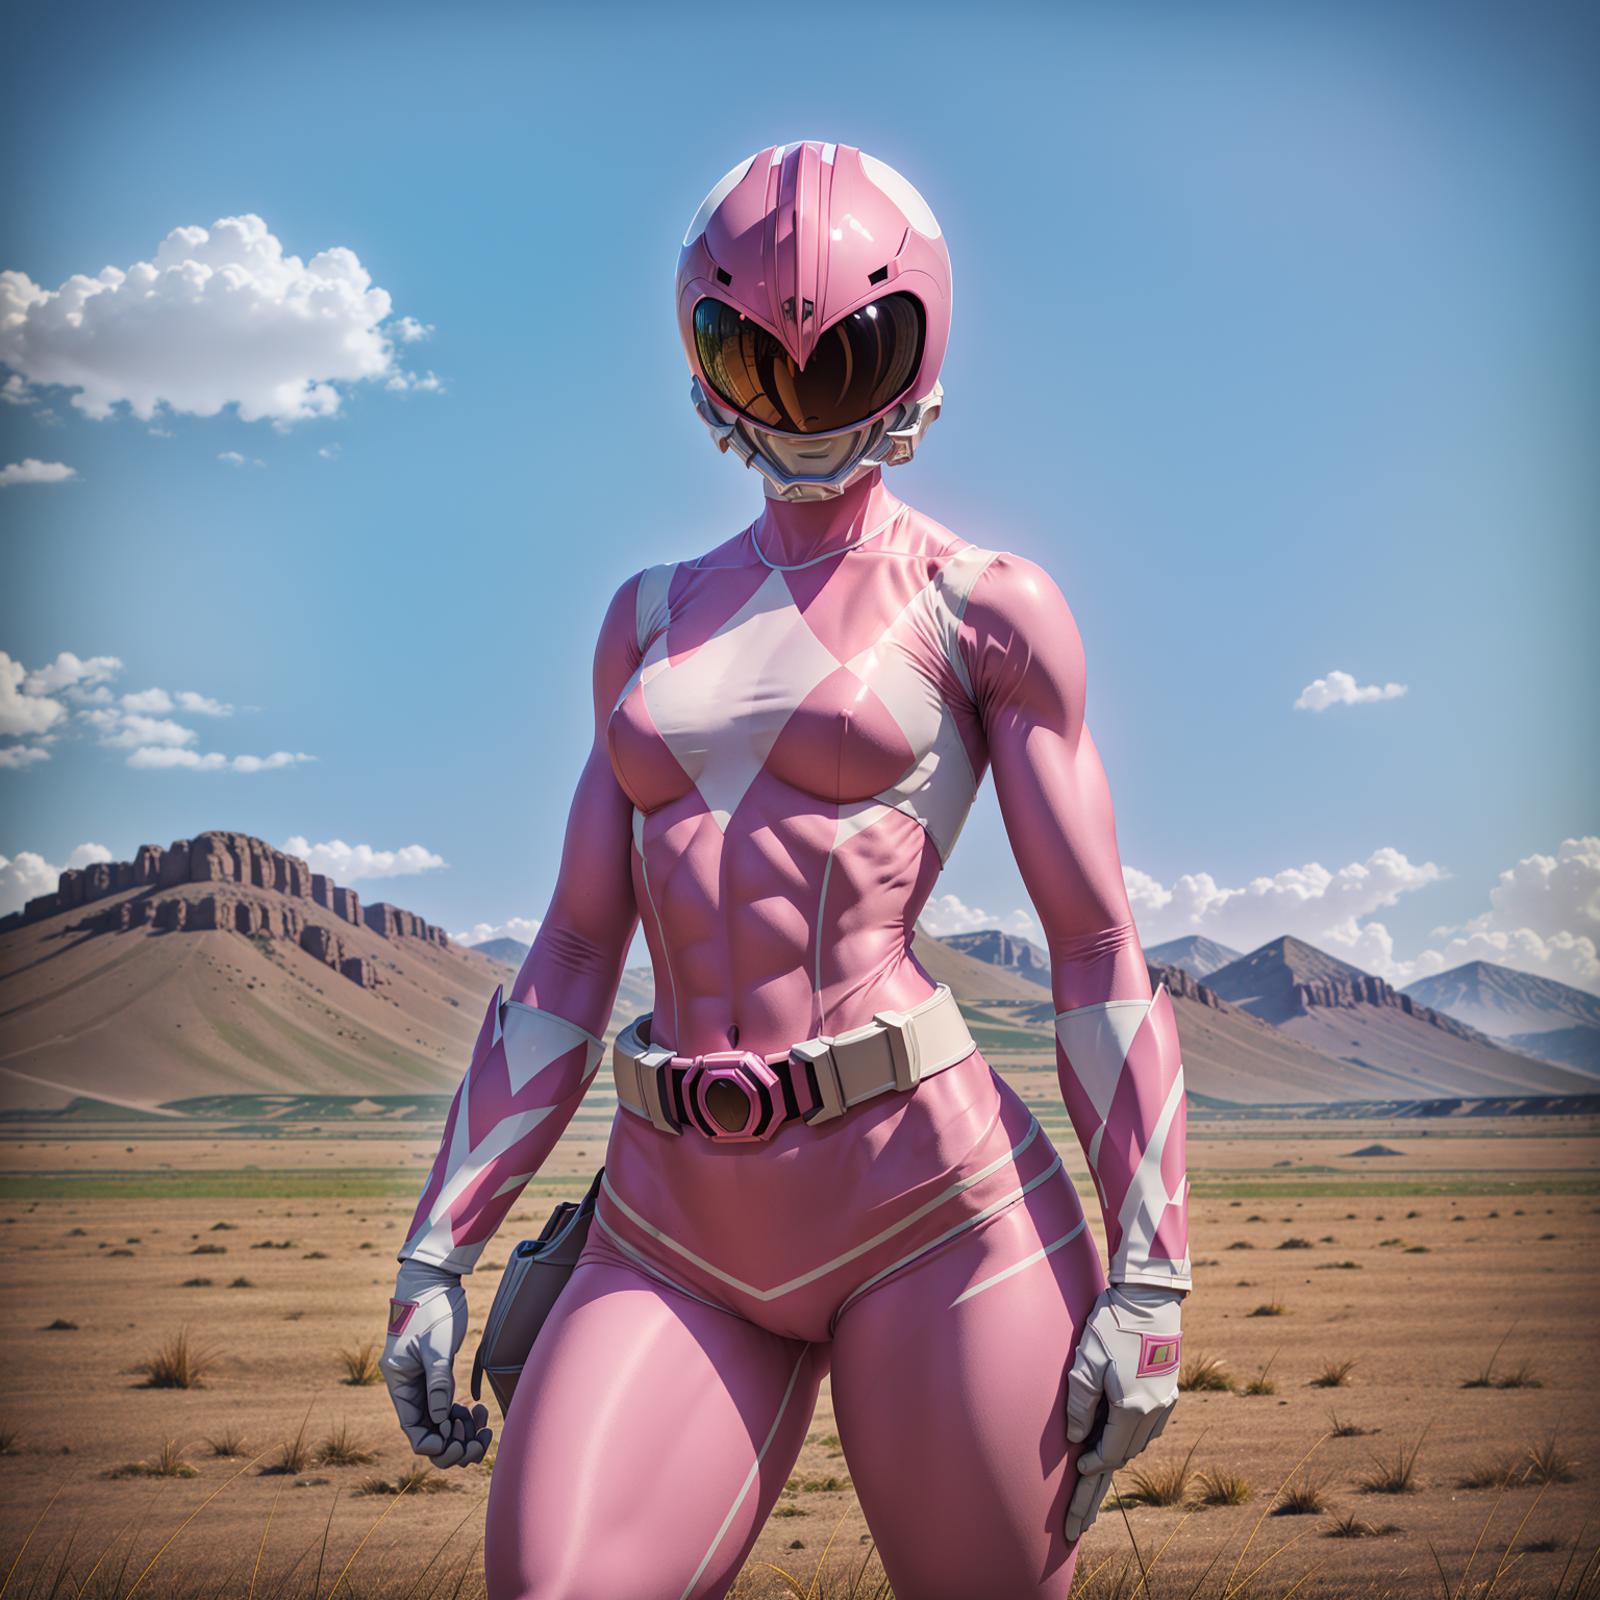 Pink Ranger image by Noofiso